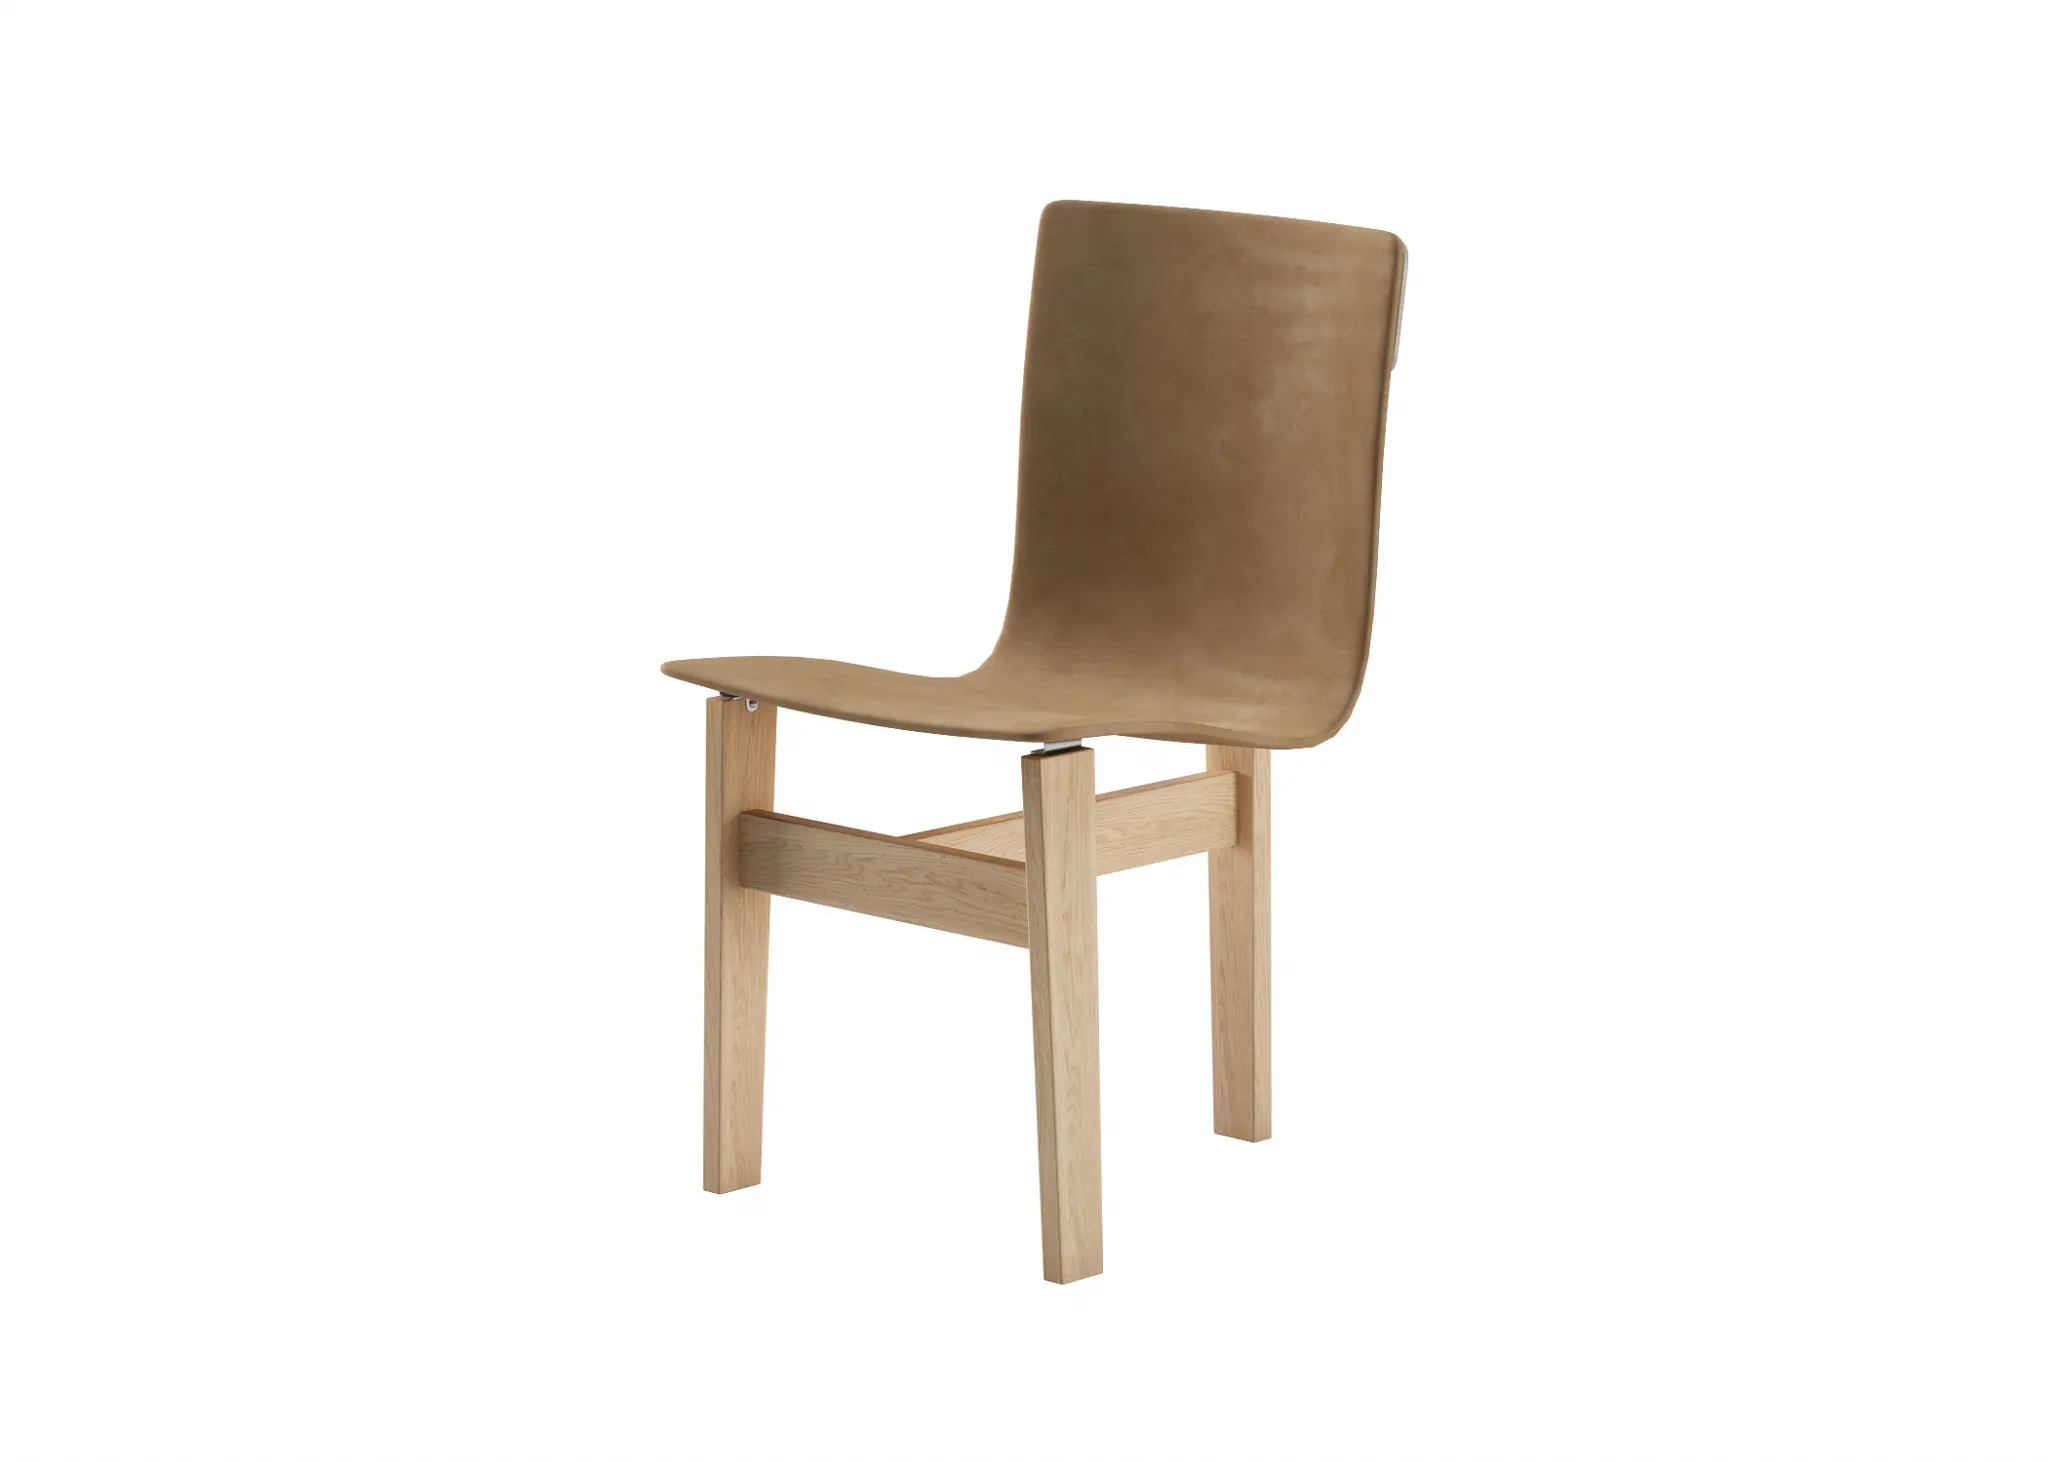 FURNITURE 3D MODELS – CHAIRS – 0442